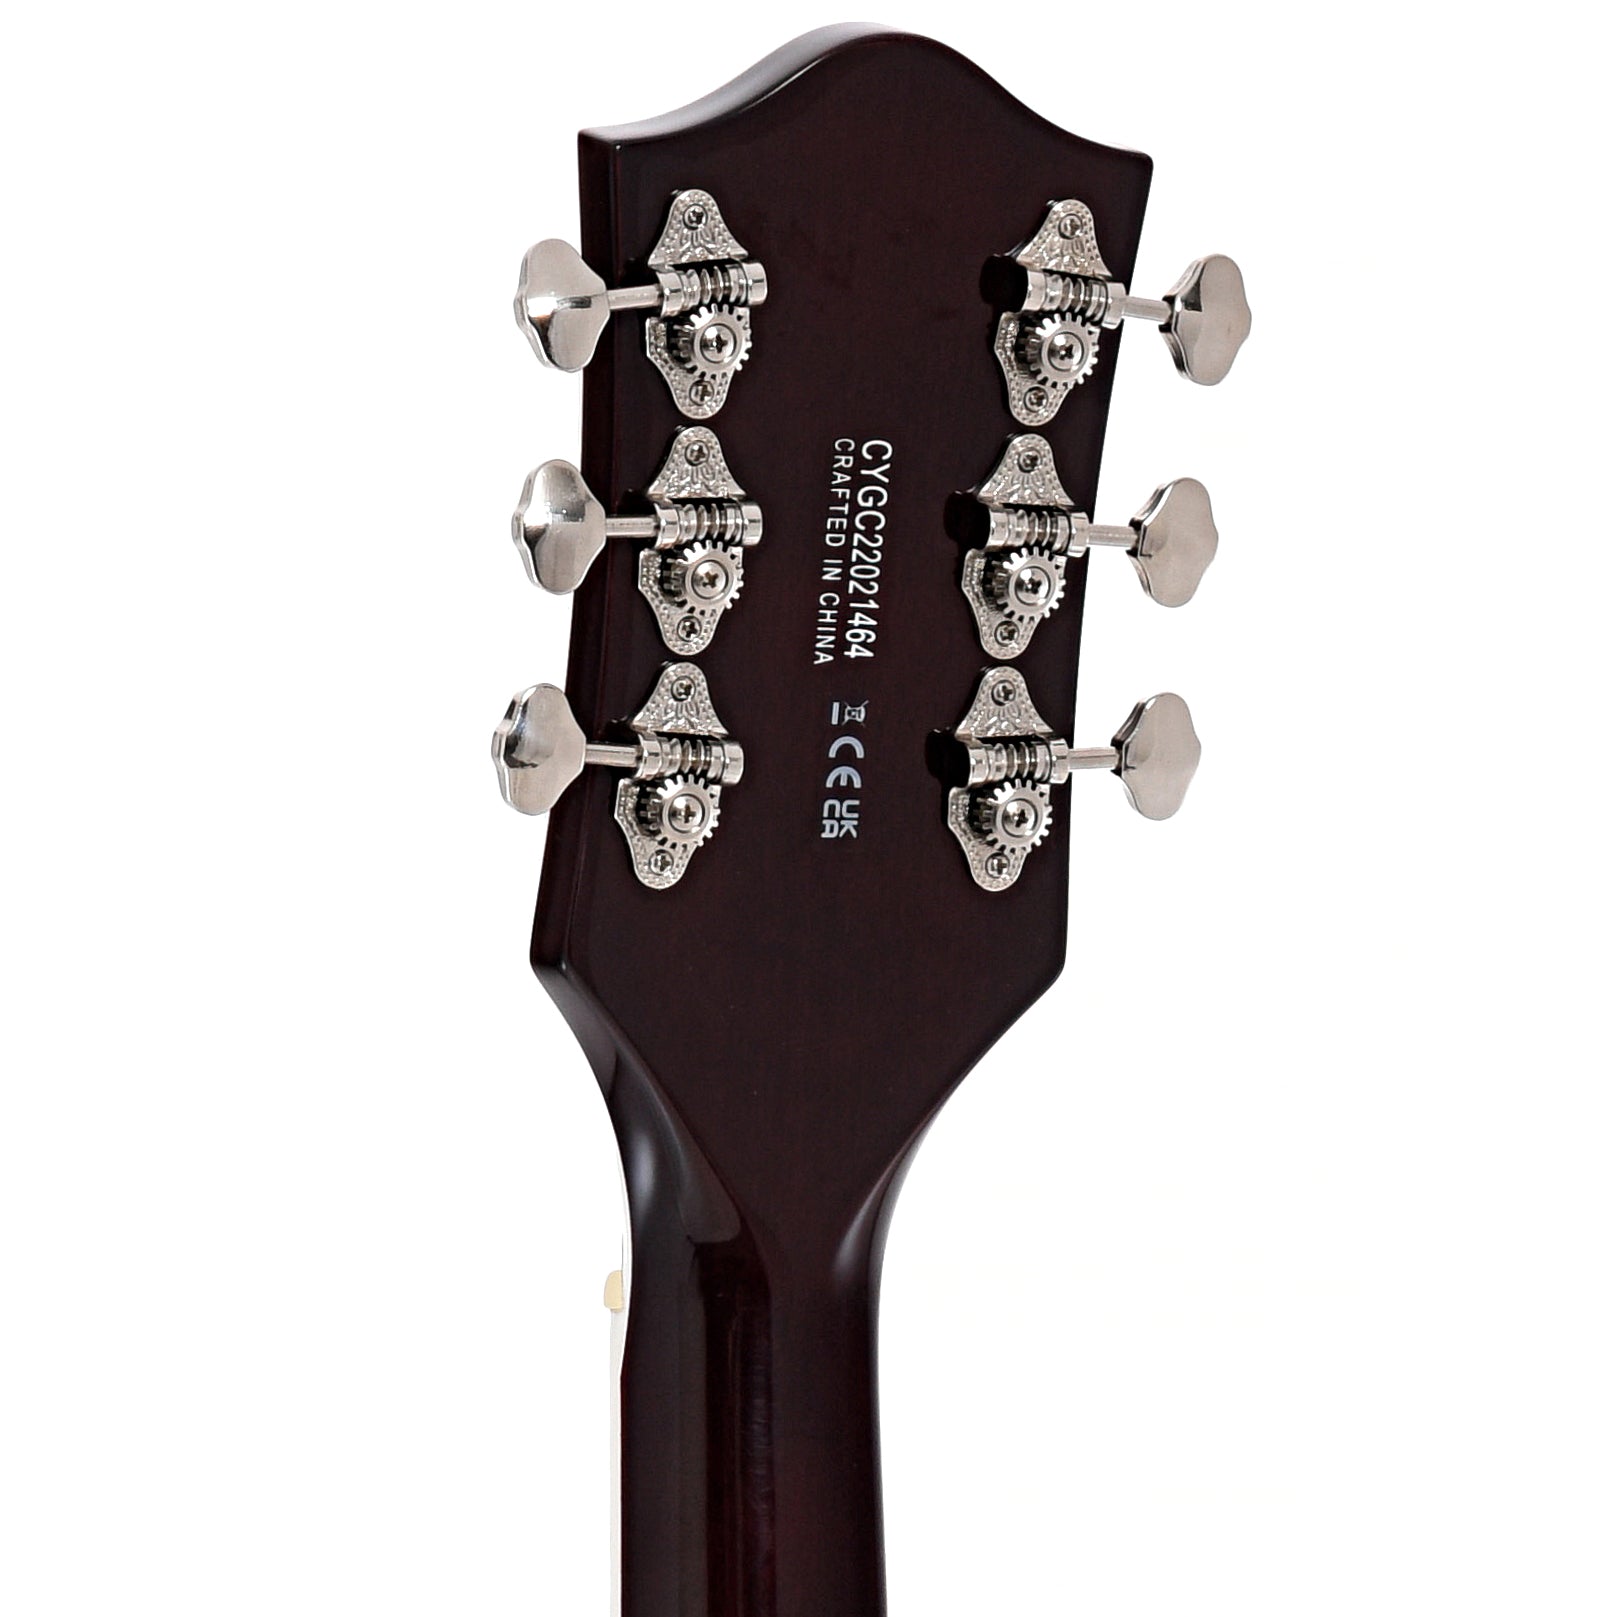 Image 8 of Gretsch G5420T Electromatic Classic Hollow Body Single Cut with Bigbsy, Walnut Stain- SKU# G5420T-WLNT : Product Type Hollow Body Electric Guitars : Elderly Instruments